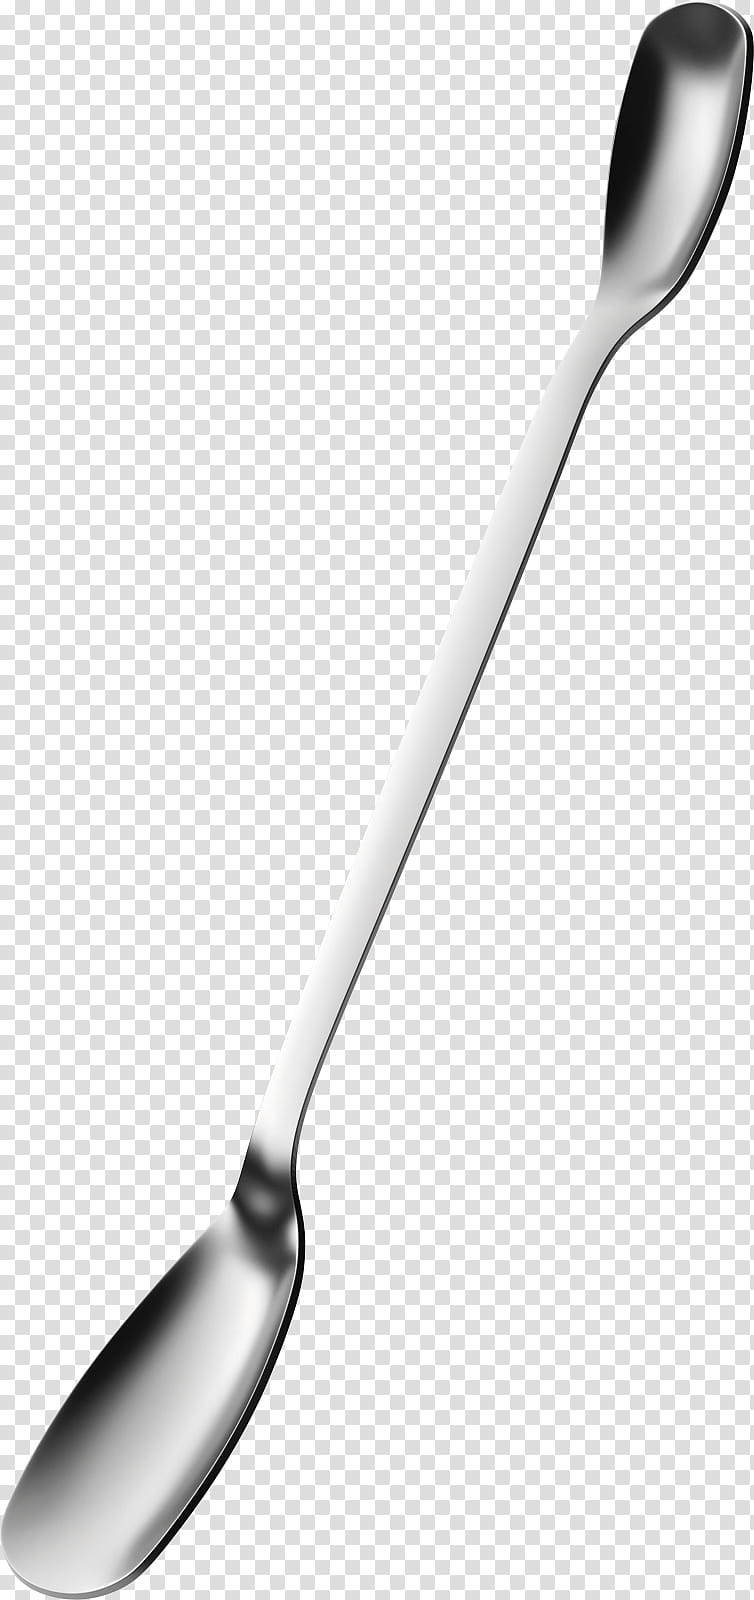 Kitchen, Spoon, Solingen, Teaspoon, Measuring Spoon, Carl Mertens, Tablespoon, Cutlery transparent background PNG clipart